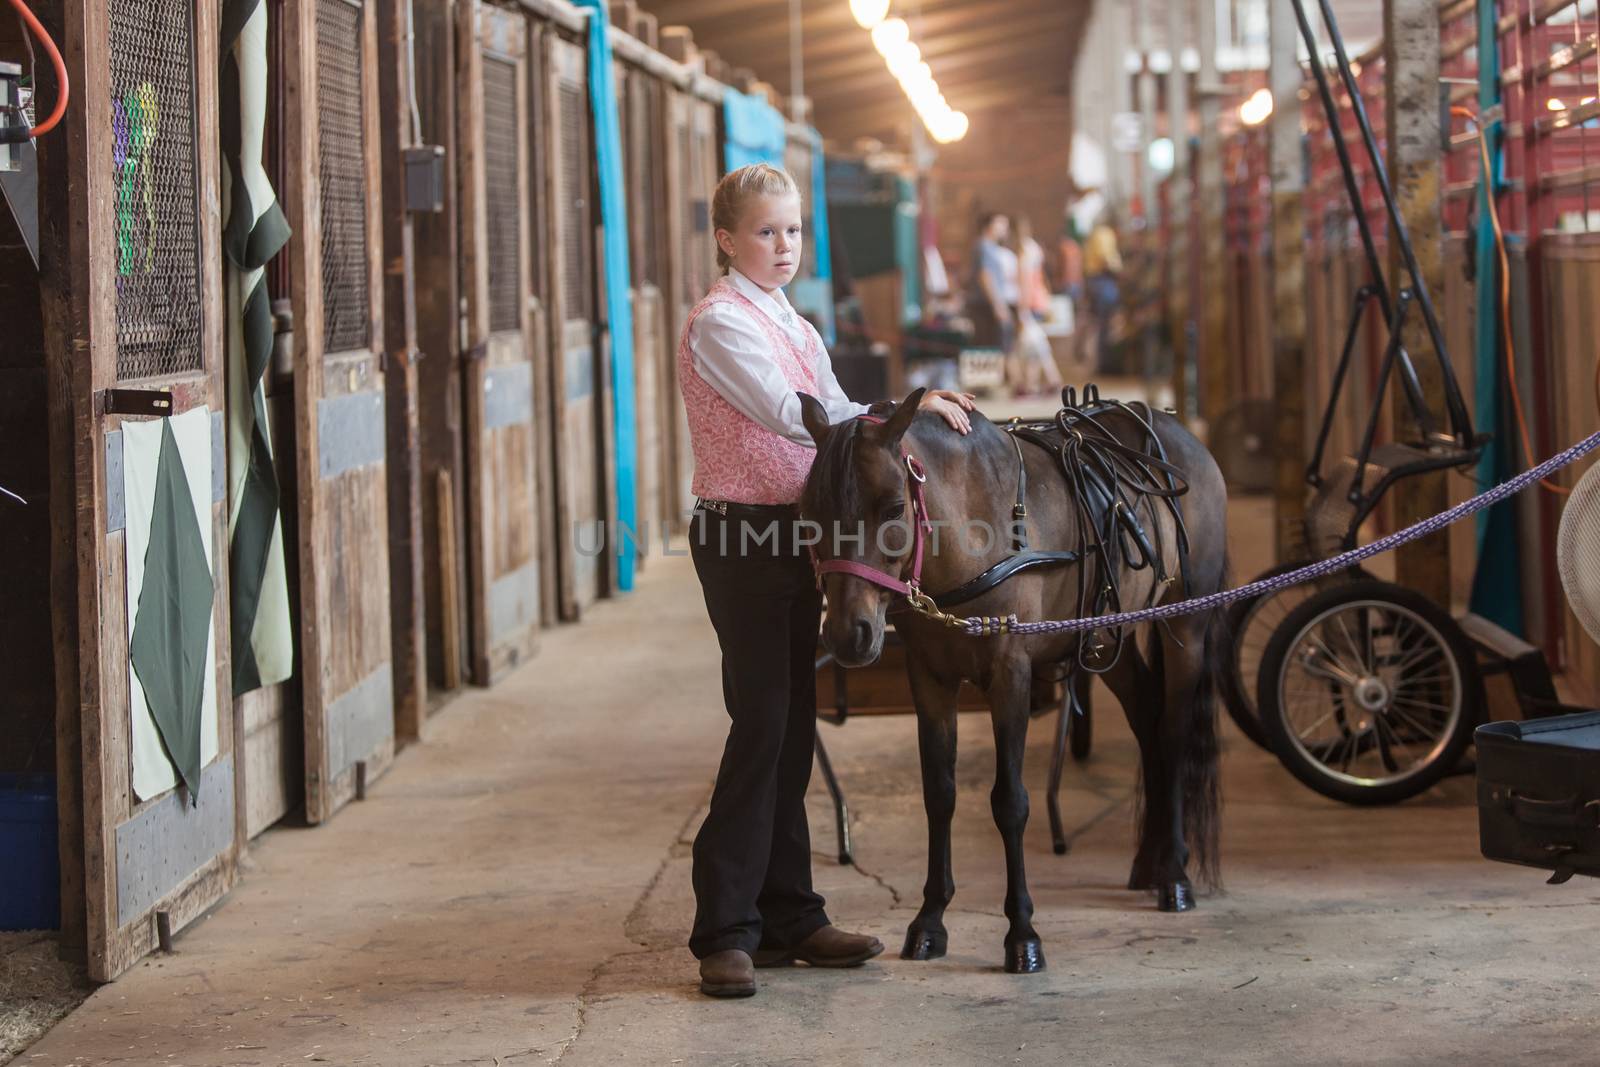 DES MOINES, IA /USA - AUGUST 10: Unidentified girl with minitature horse at Iowa State Fair on August 10, 2014 in Des Moines, Iowa, USA.